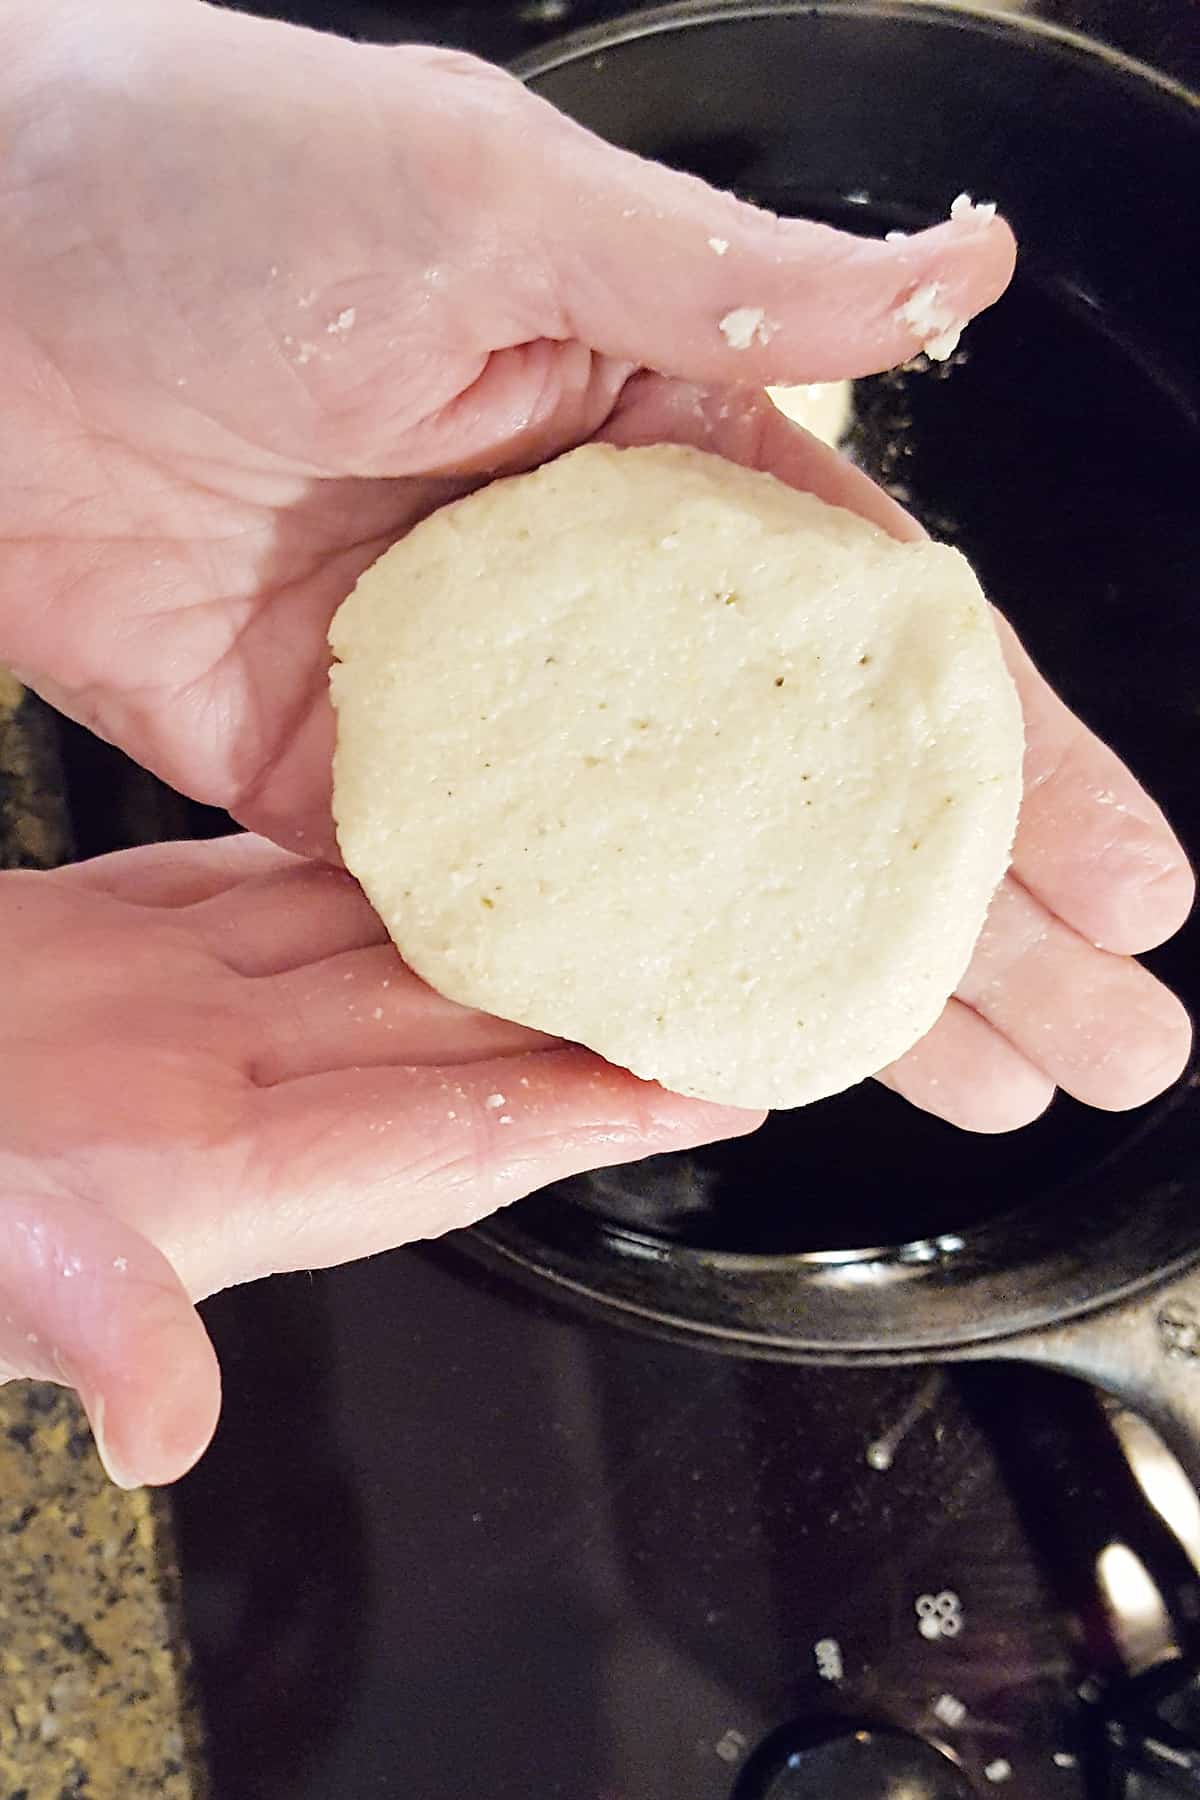 Cornmeal patty formed by hand.